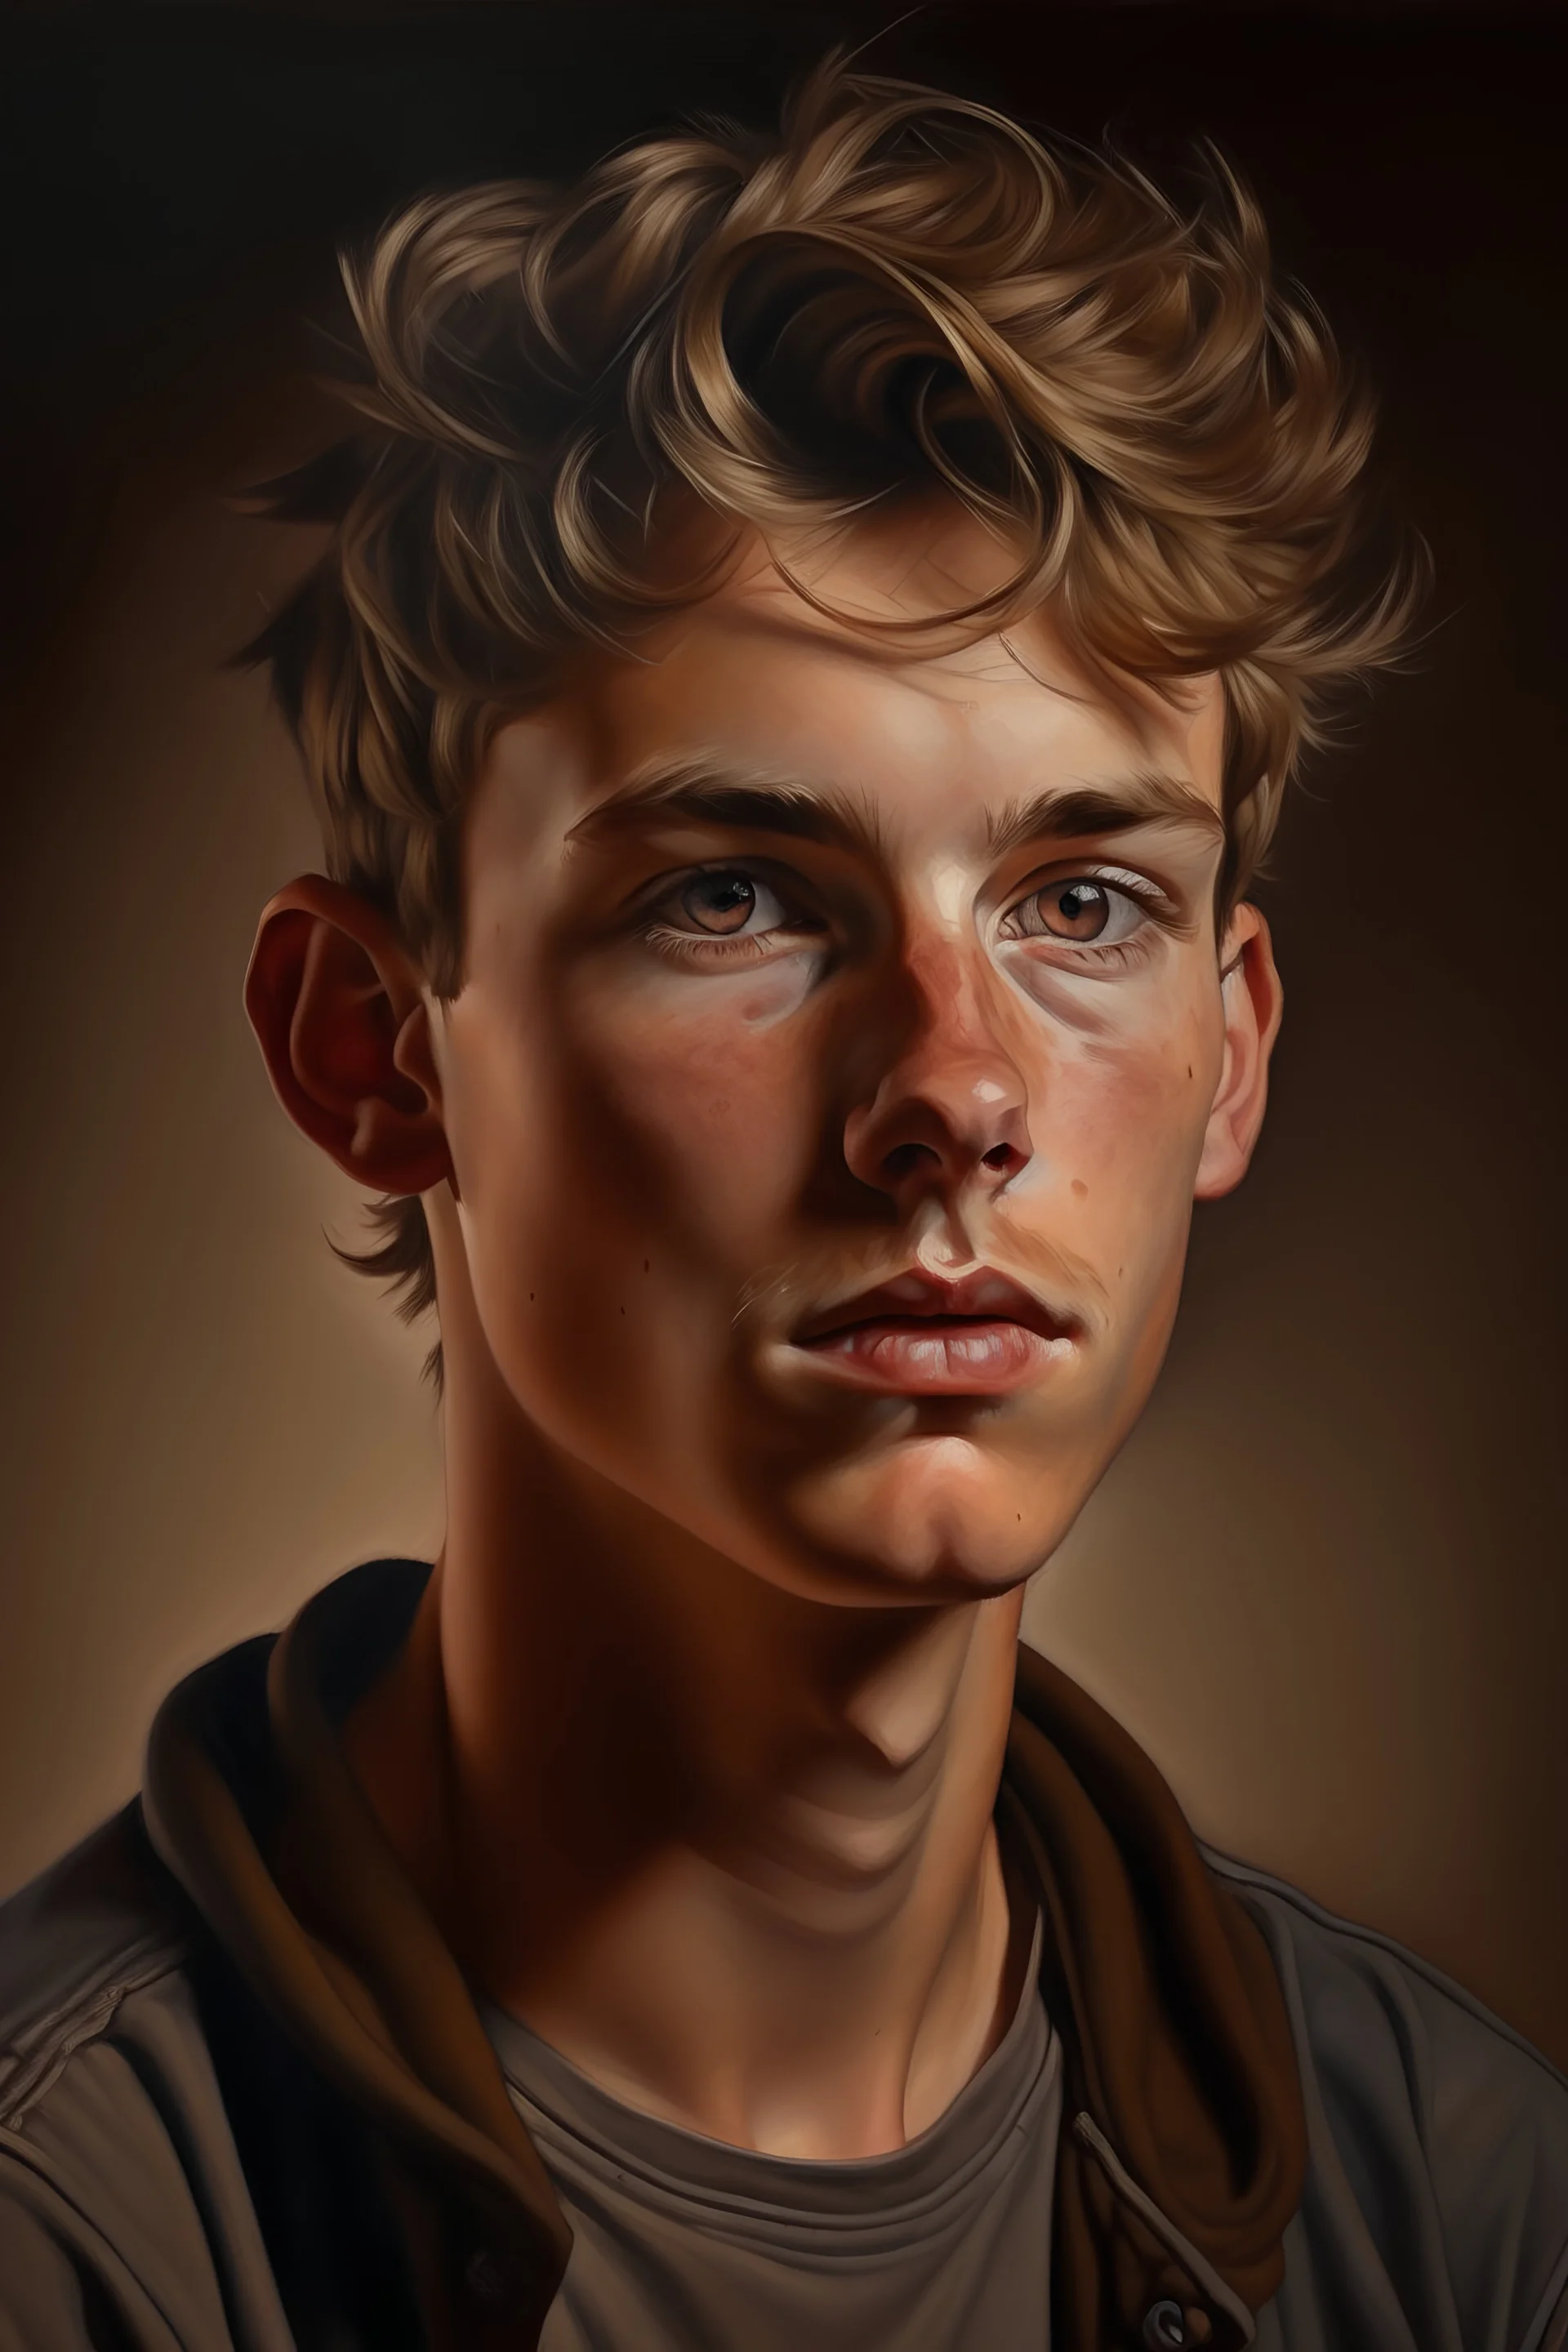 realistic portrait of brahm stokers young adultJohnathon harker